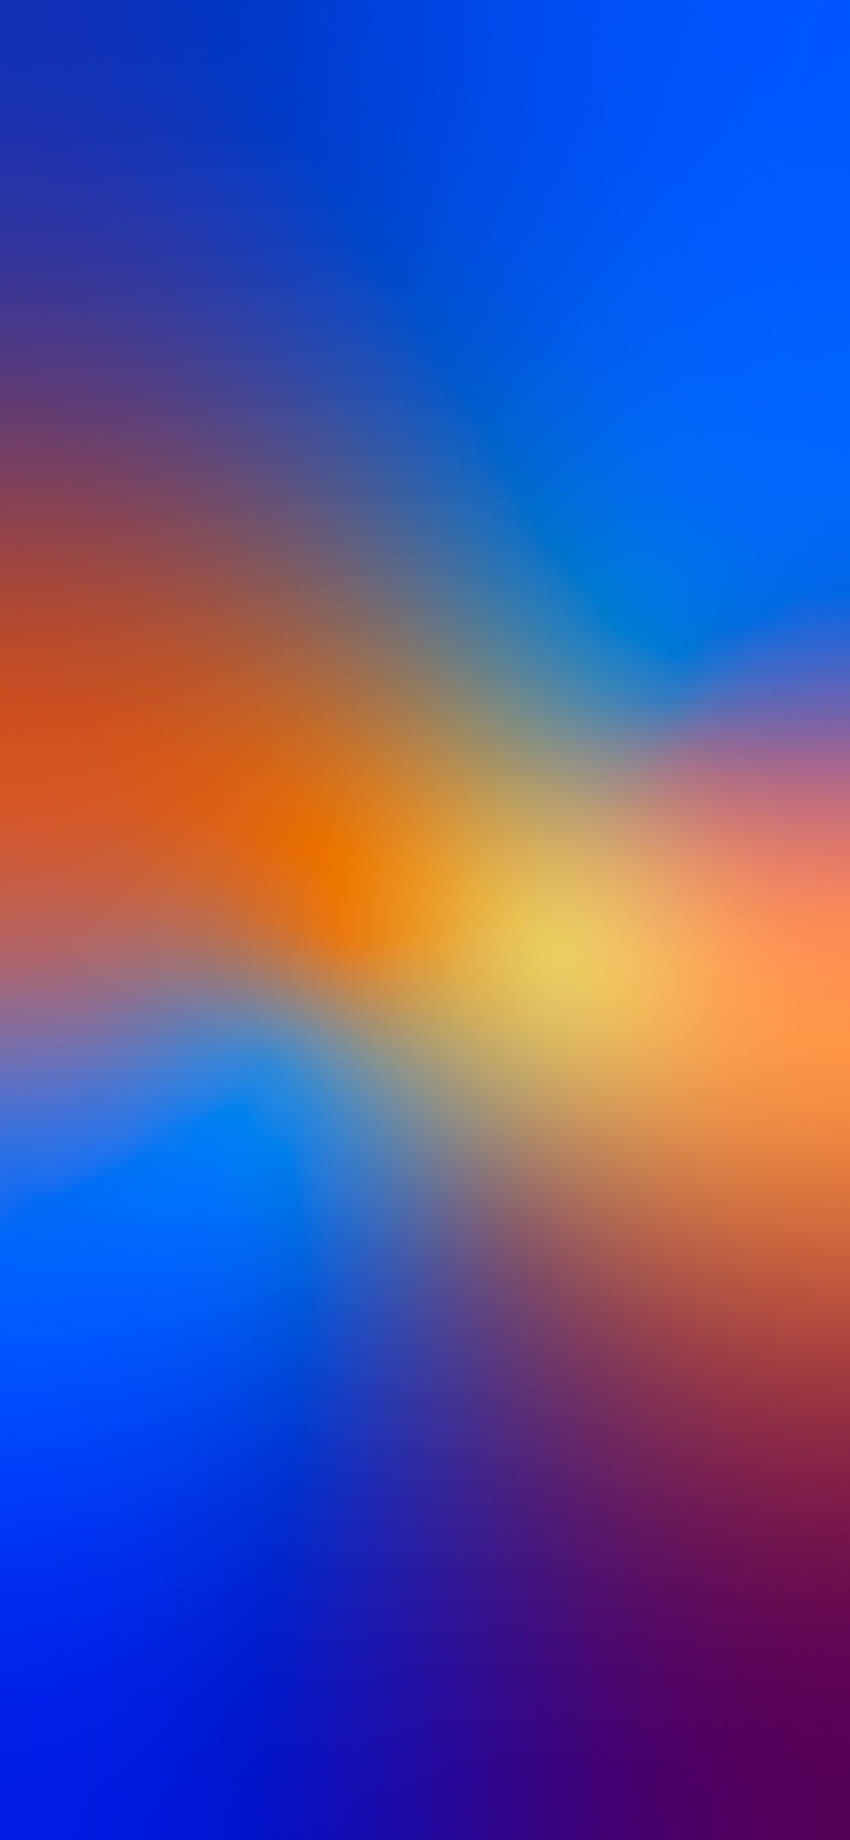 Blue to Orange gradient for iPhone on Twitter. Apple iphone , iphone , Oneplus HD phone wallpaper